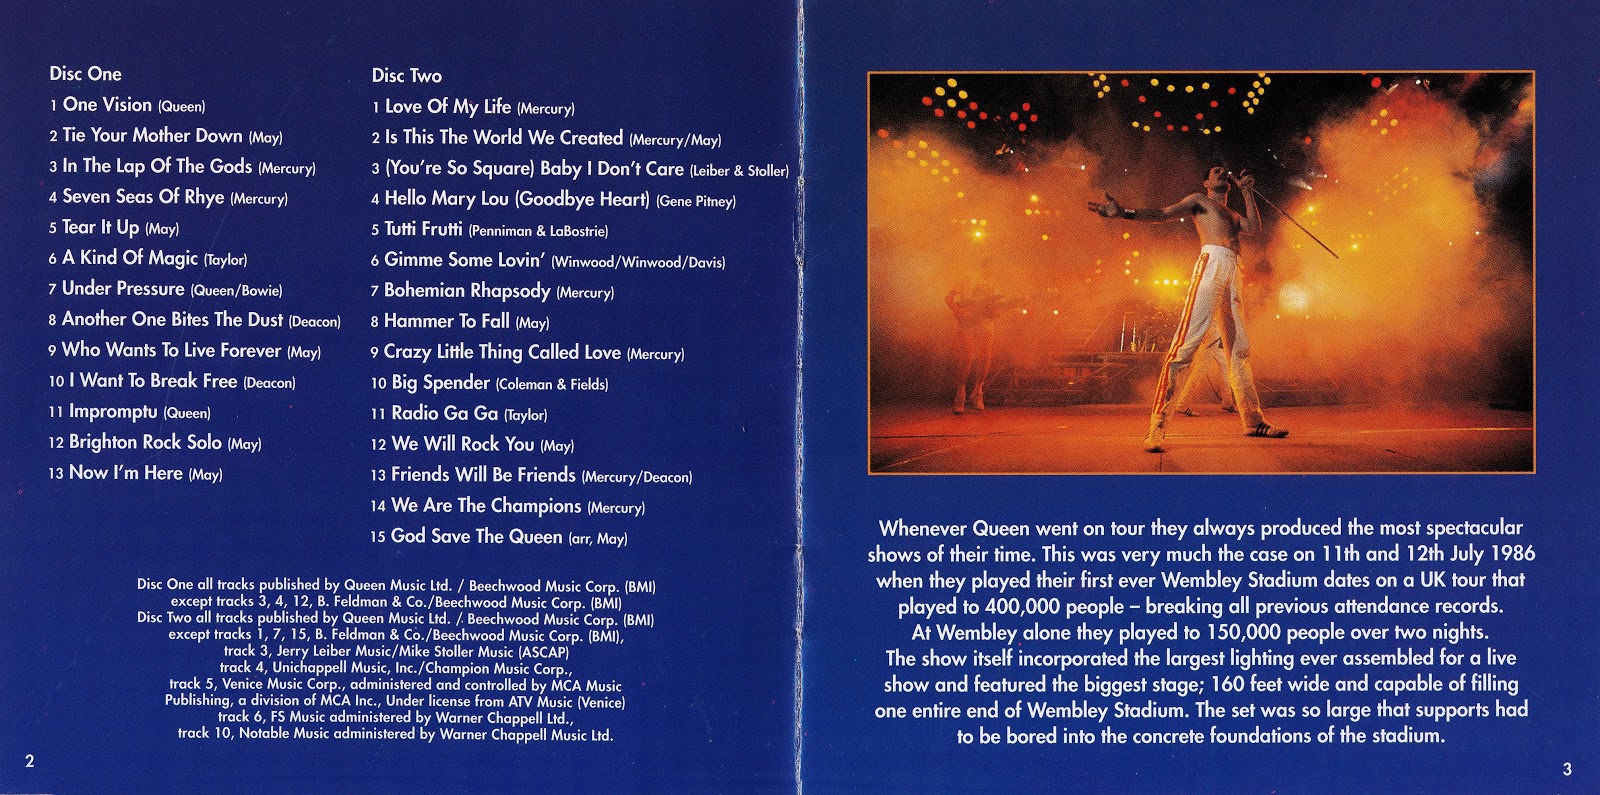 Queen 1992 Live at Wembley 86. Who wants to Live Forever Queen OST.